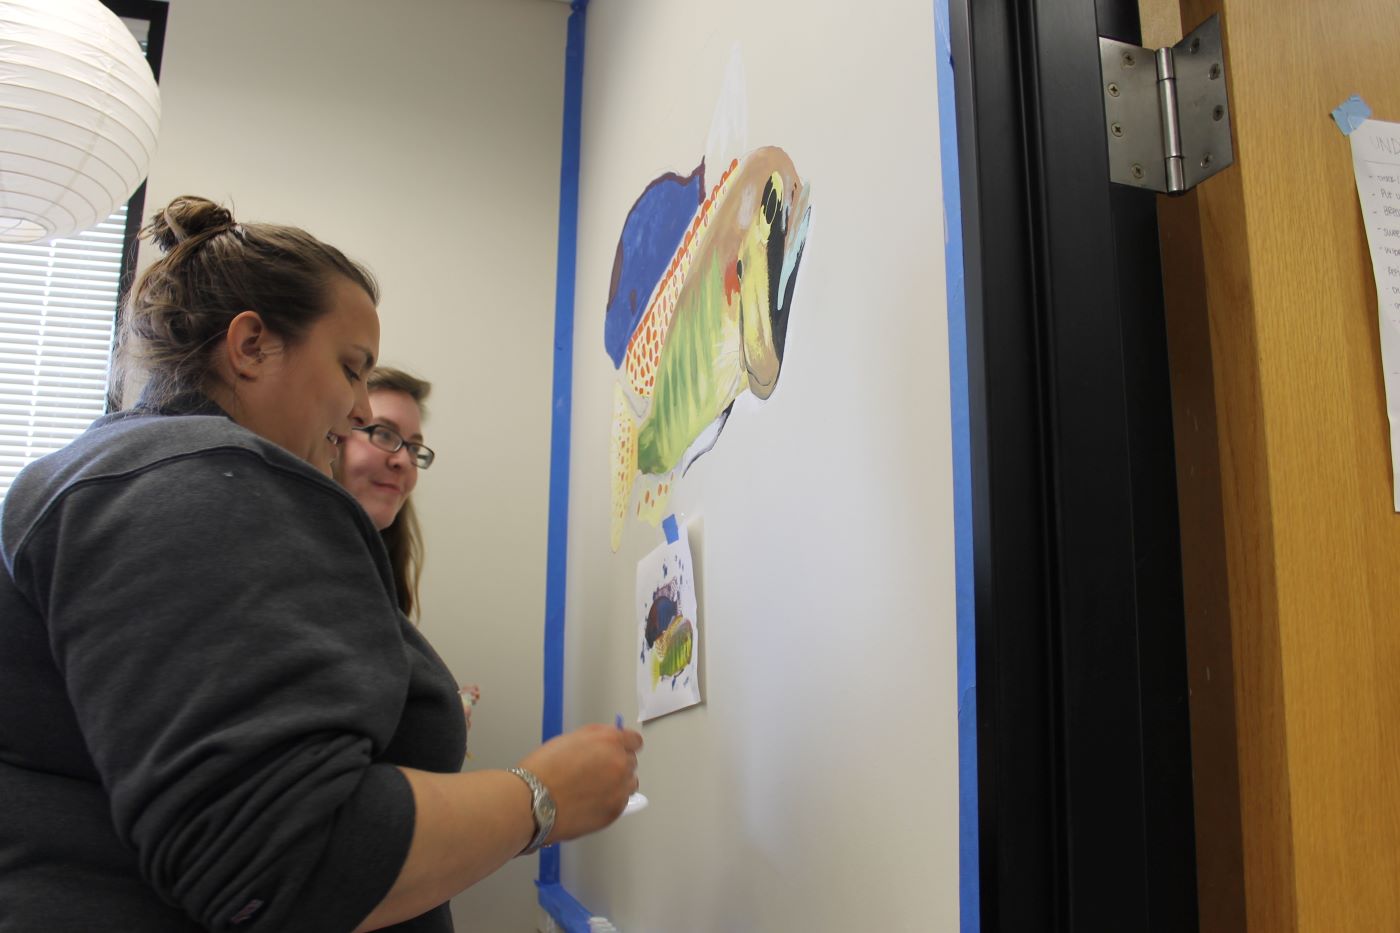 Julie and others help paint the Maruska lab logo